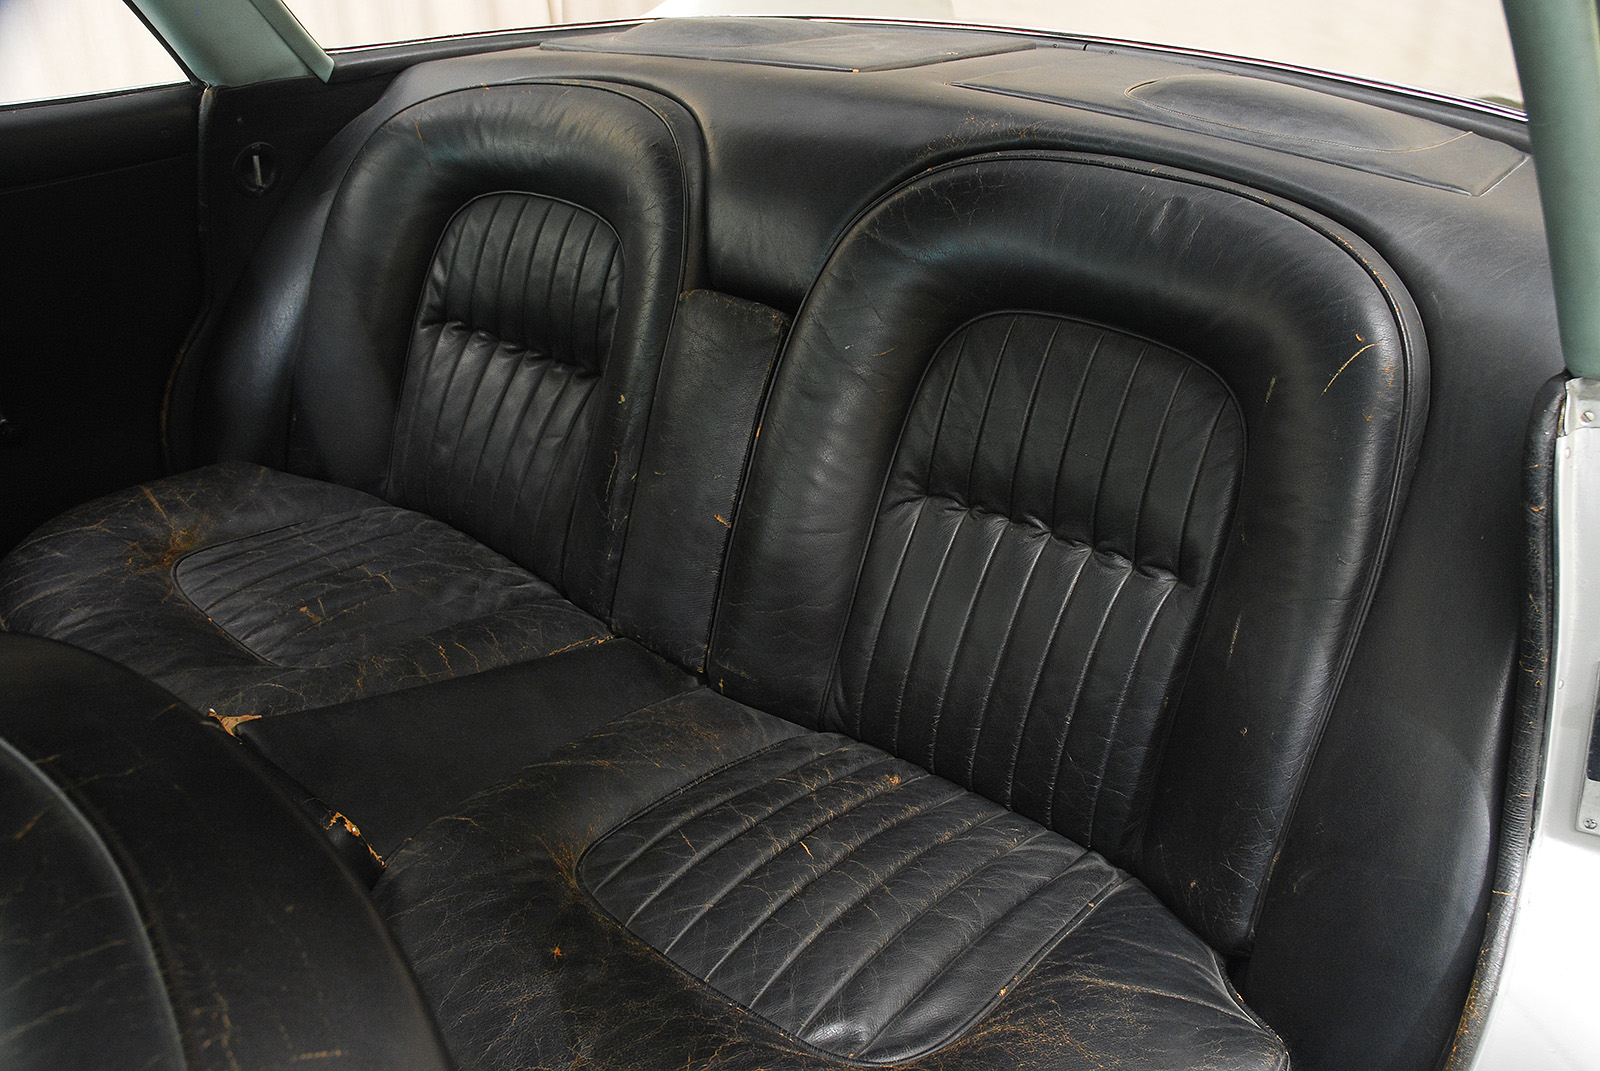 Rear seats look comfortable enough. Compared to other inexpensive cars they look inviting. (Picture courtesy hymanltd.com).